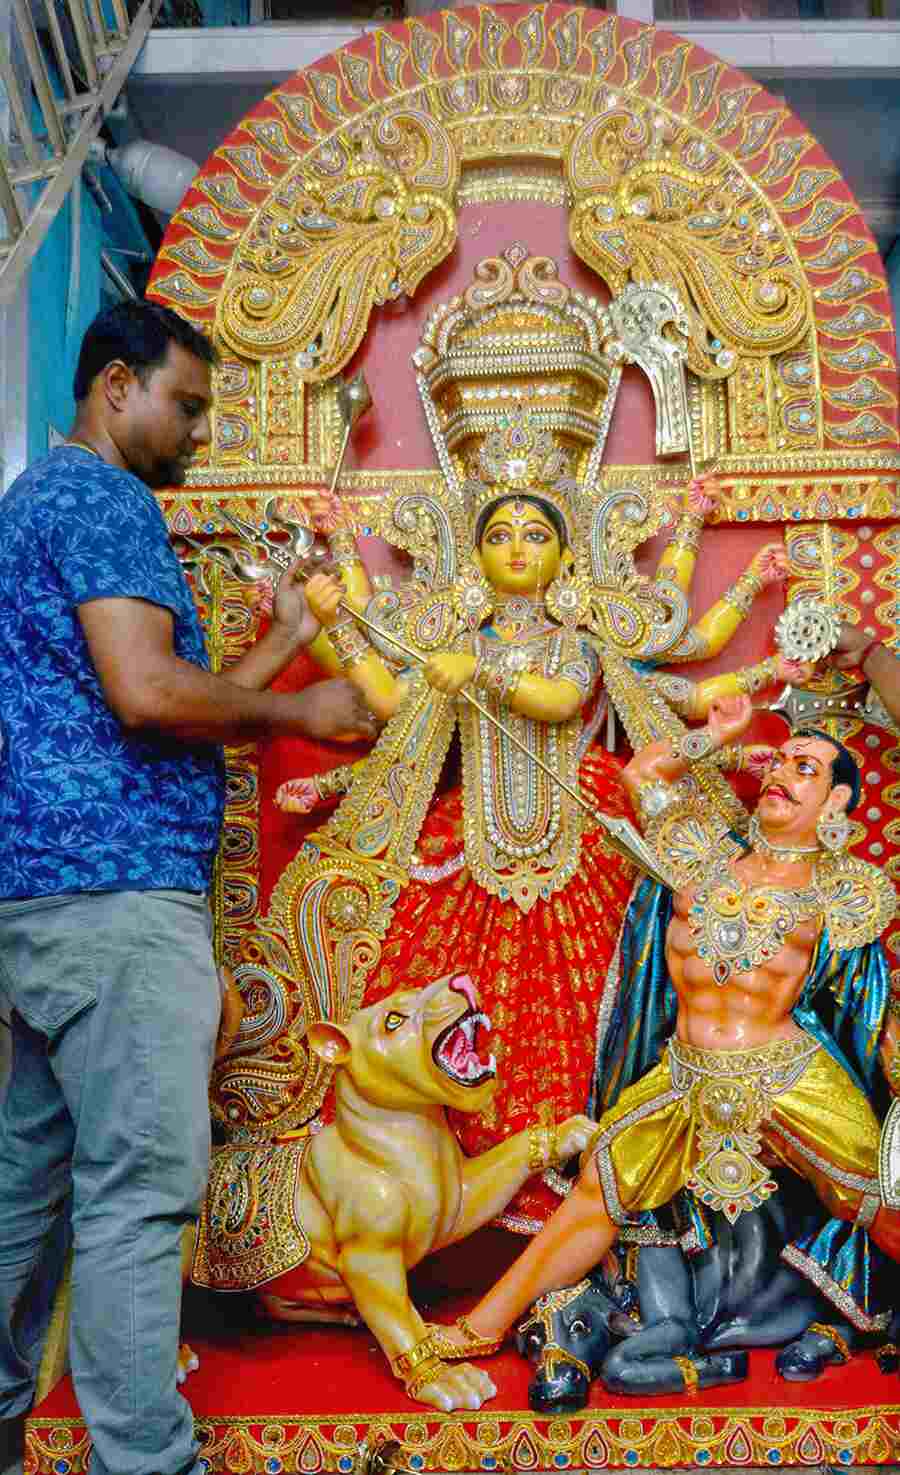 With 143 days to go for Durga Puja, idol-makers at Kumartuli are already busy completing Durga idols to send off to faraway lands. In picture, artist Kaushik Ghosh puts the finishing touches to an idol that will be travelling to London 